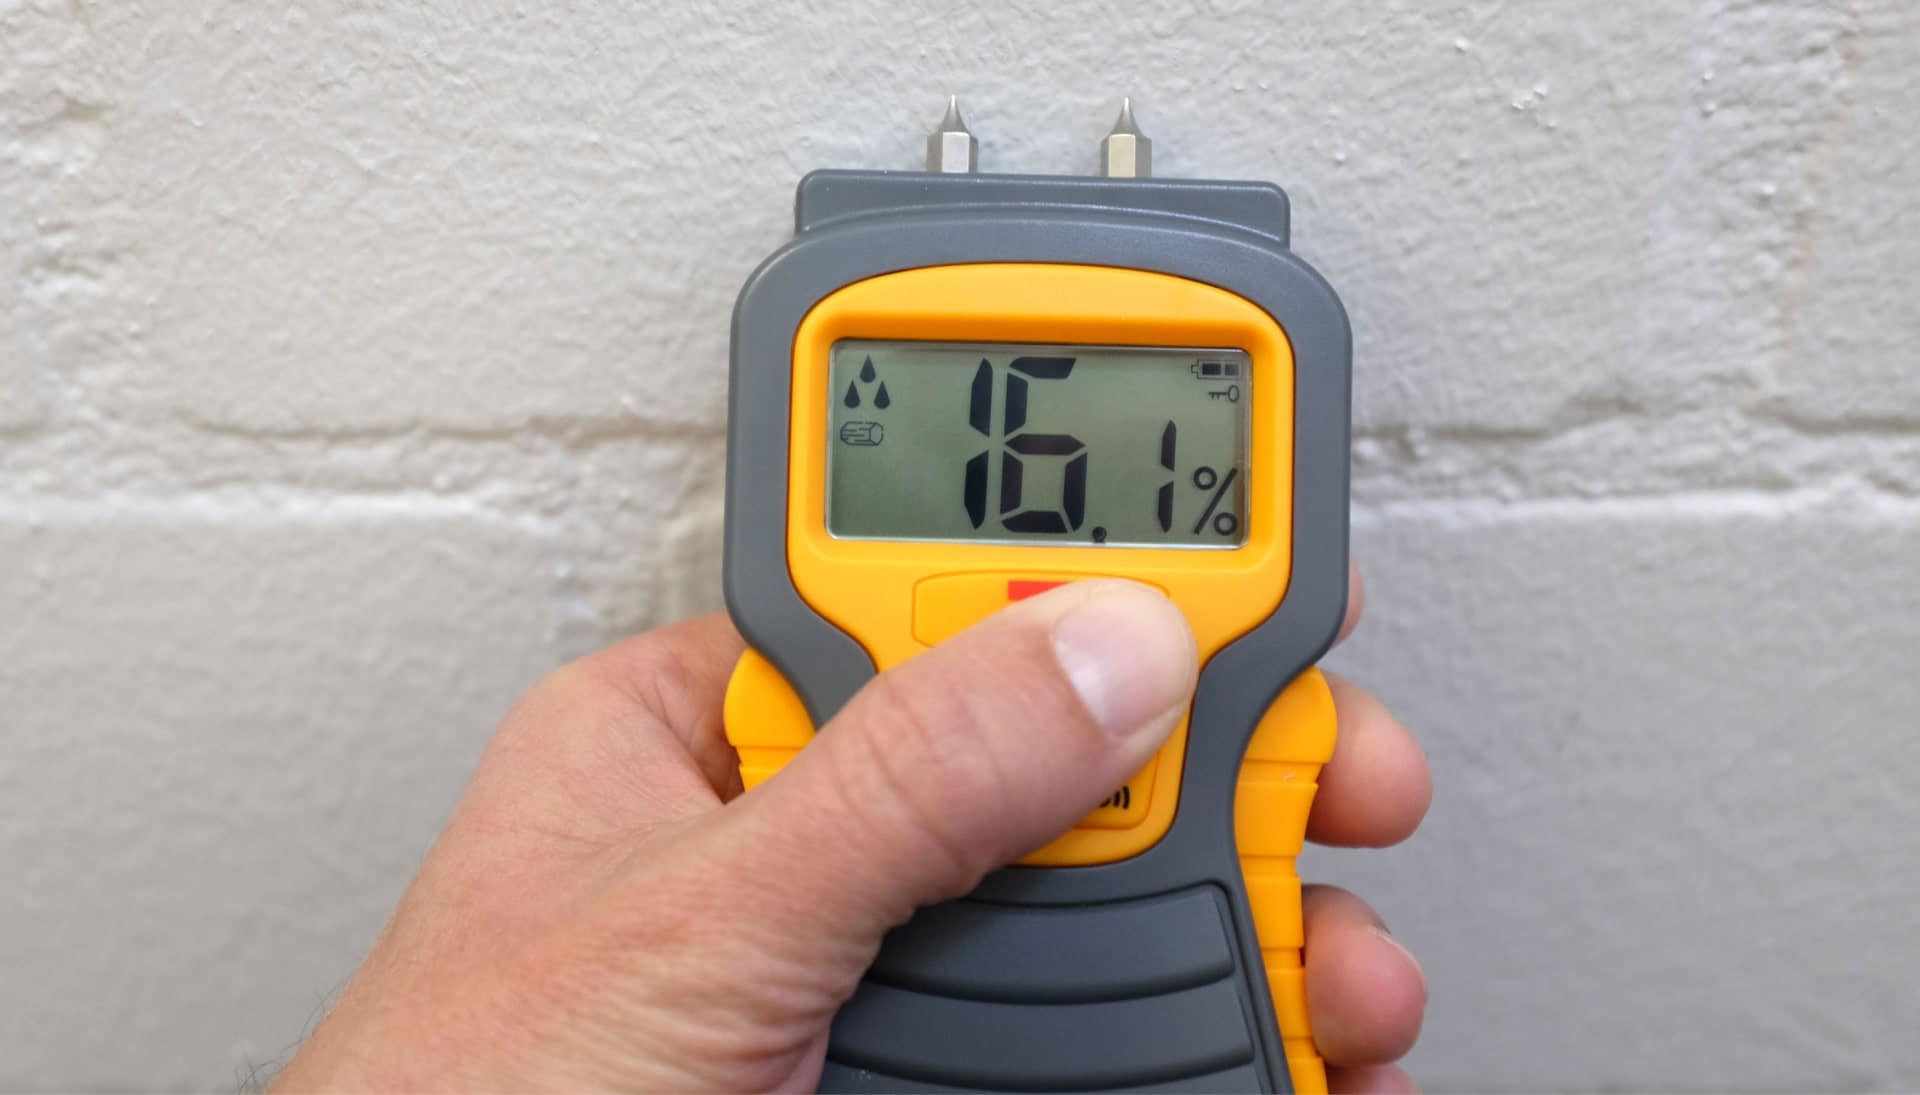 We provide fast, accurate, and affordable mold testing services in Des Moines, Iowa.